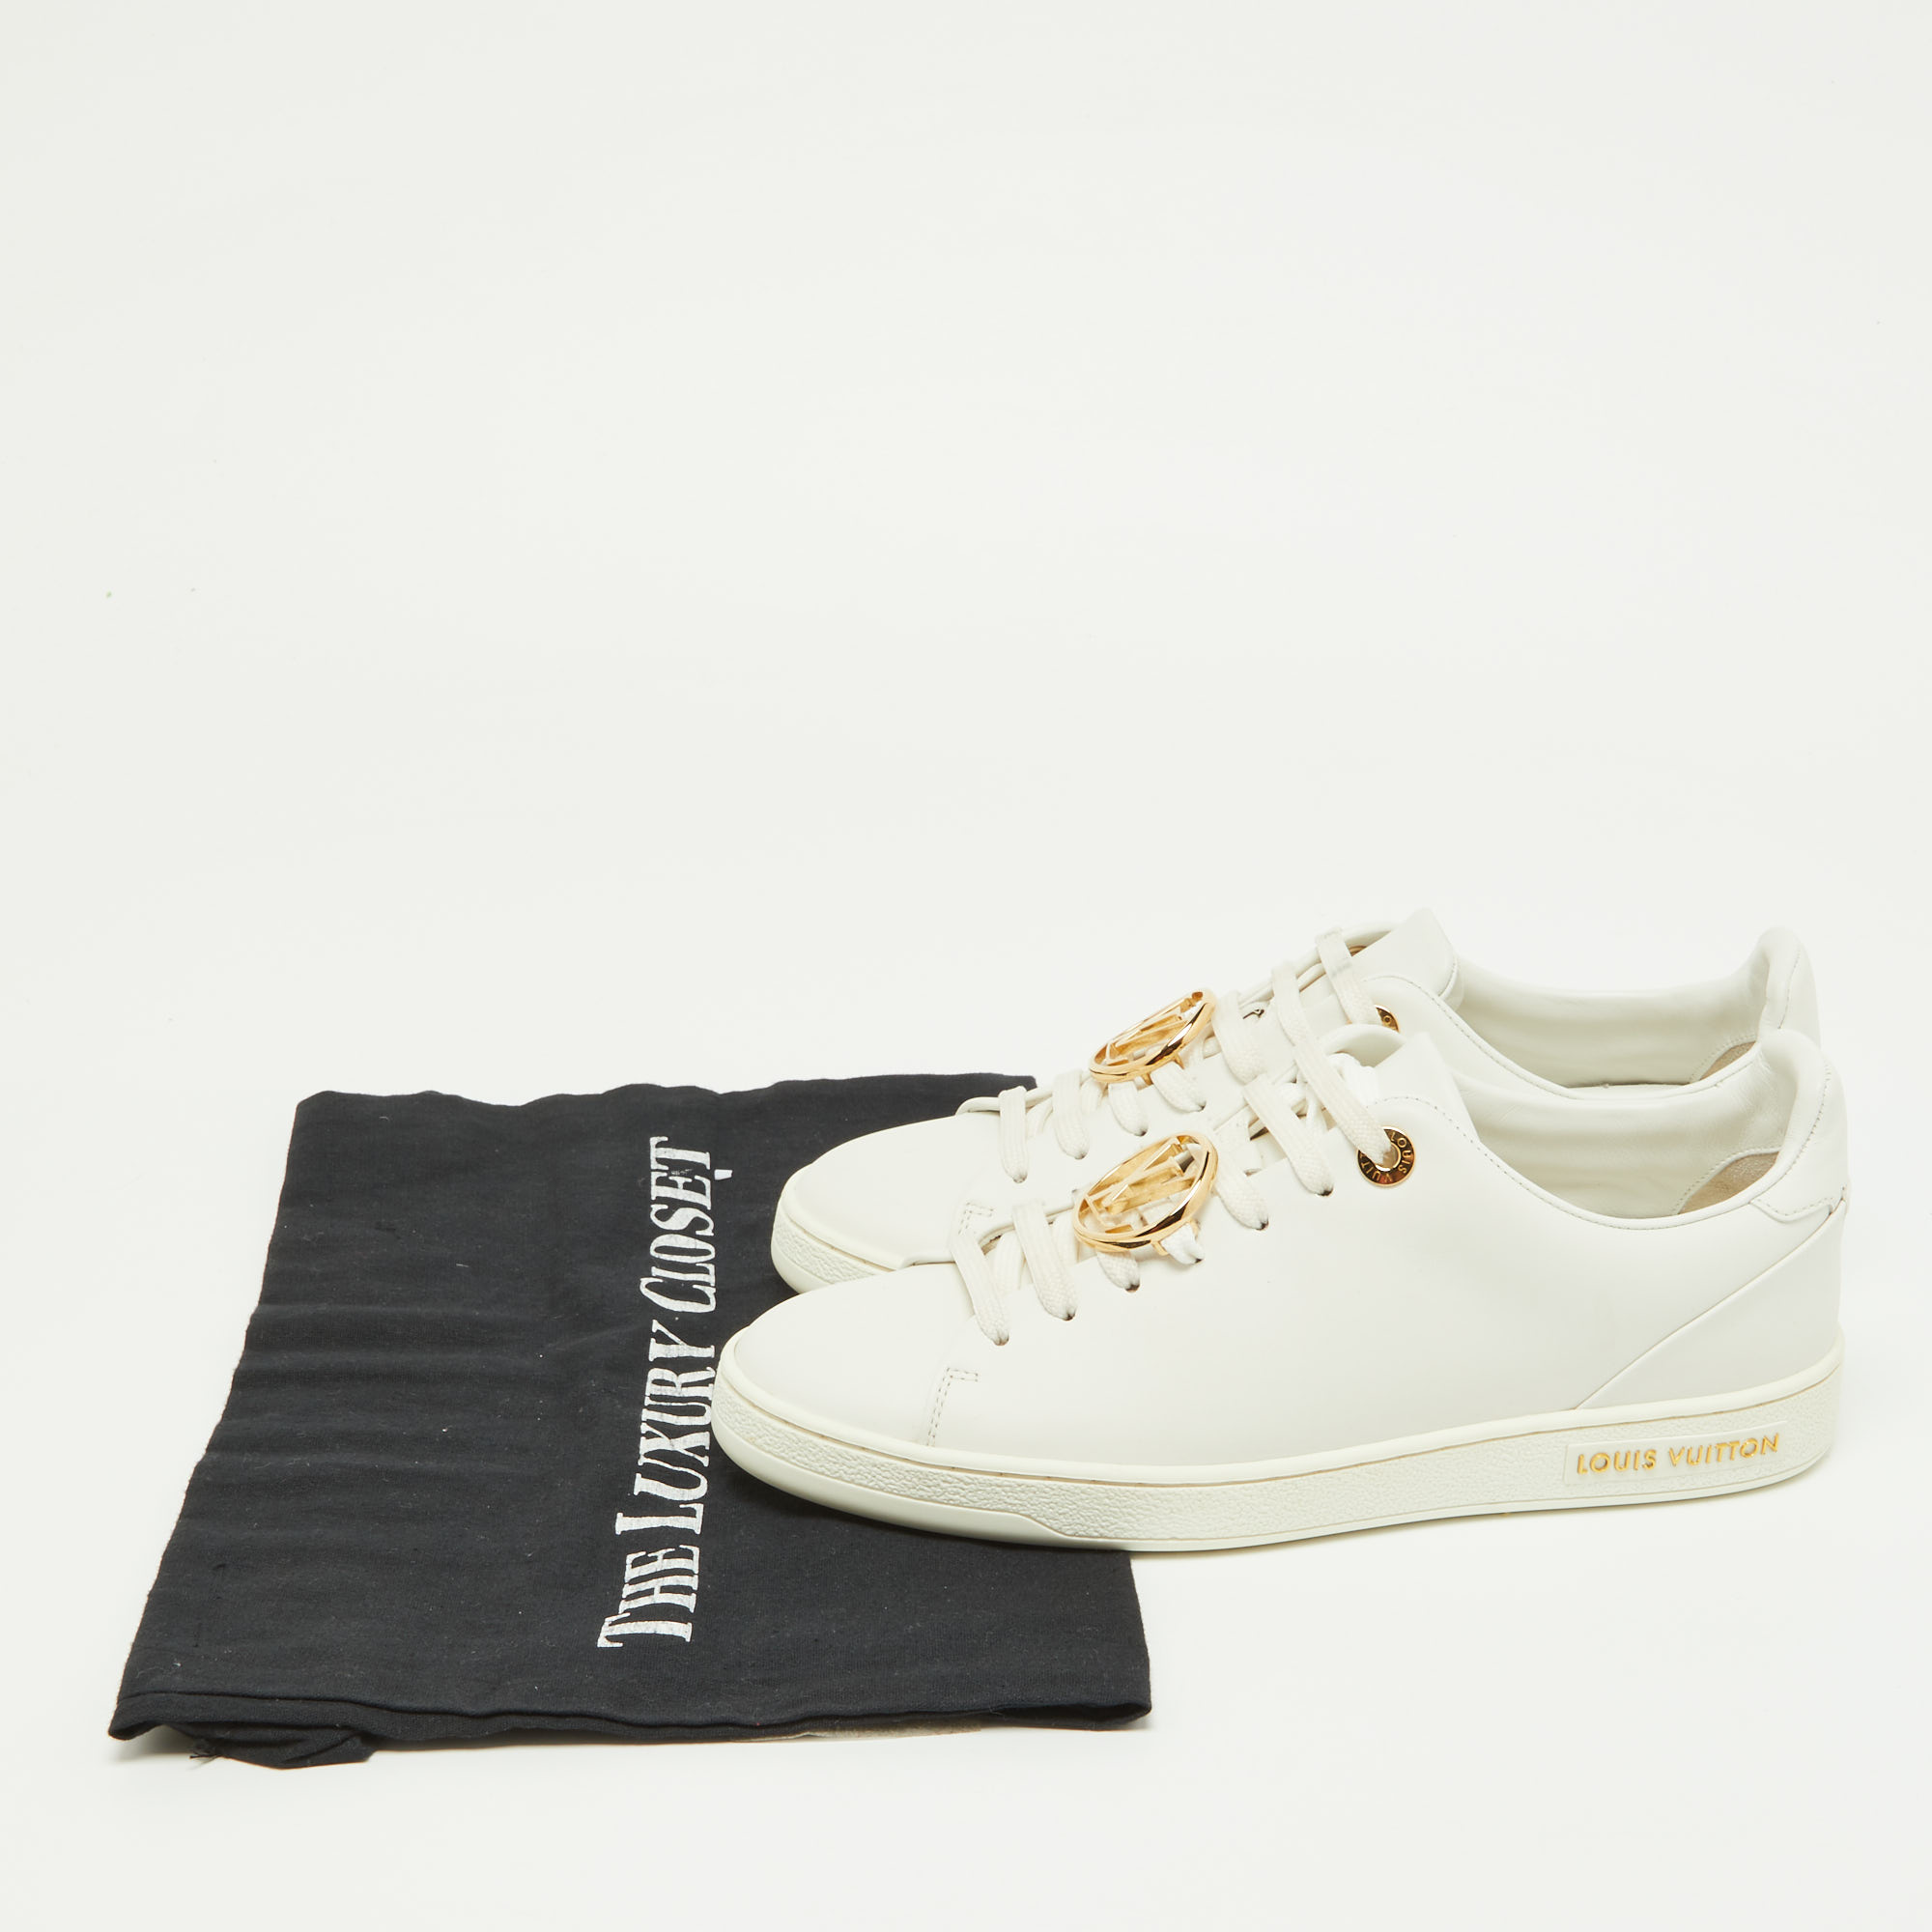 Louis Vuitton White/Gold Leather Frontrow Sneakers Size 36